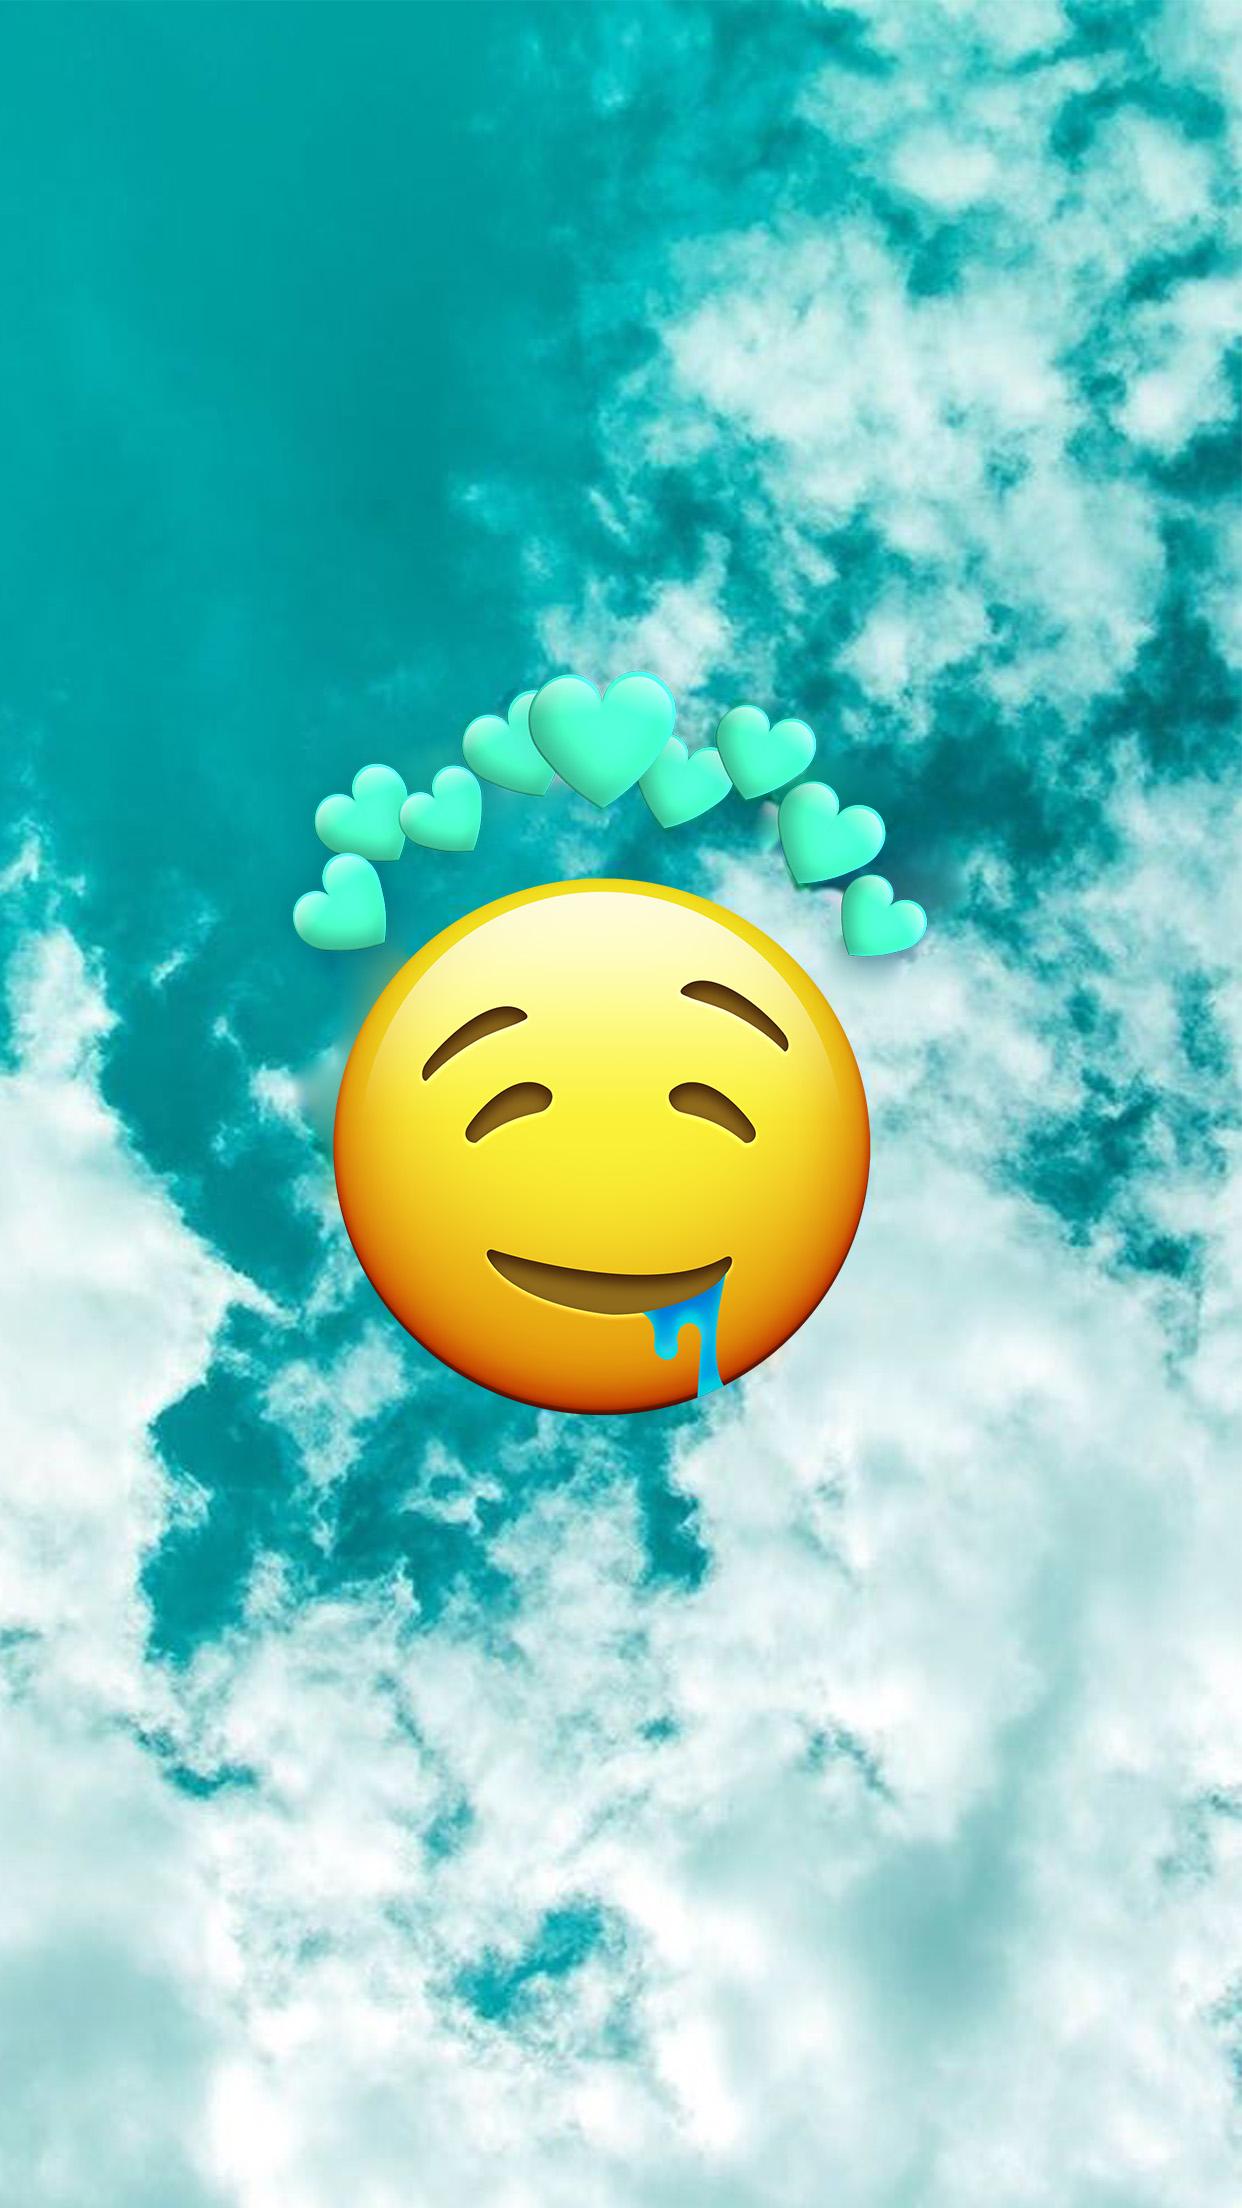 A smiling face emoji with hearts above it - Emoji